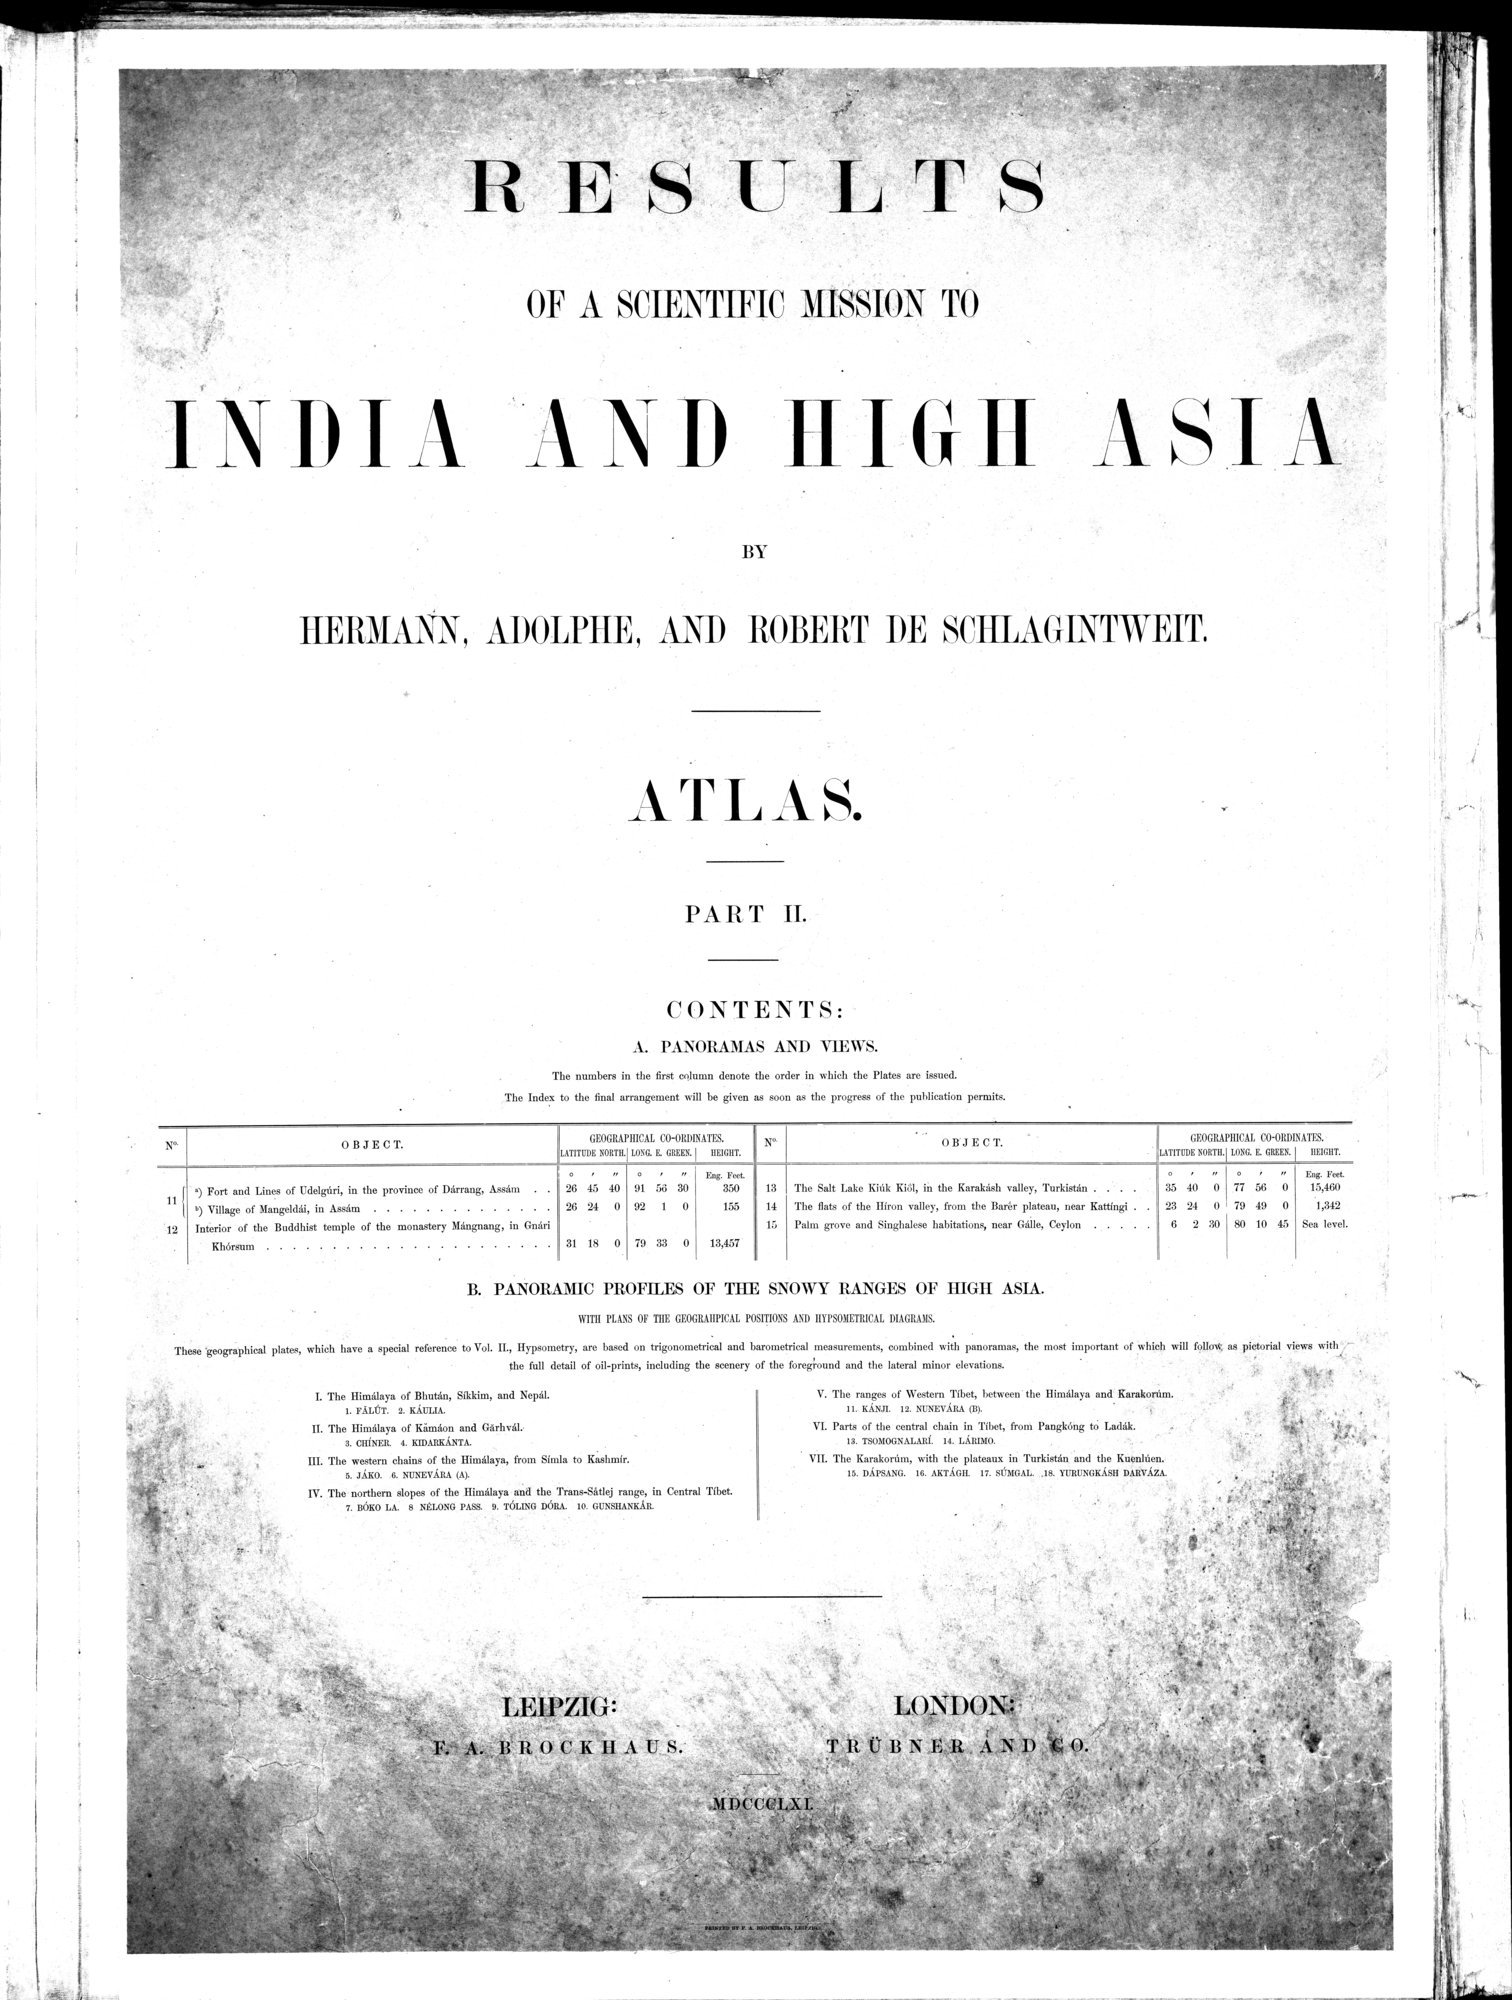 Results of a Scientific Mission to India and High Asia : vol.5 / 34 ページ（白黒高解像度画像）